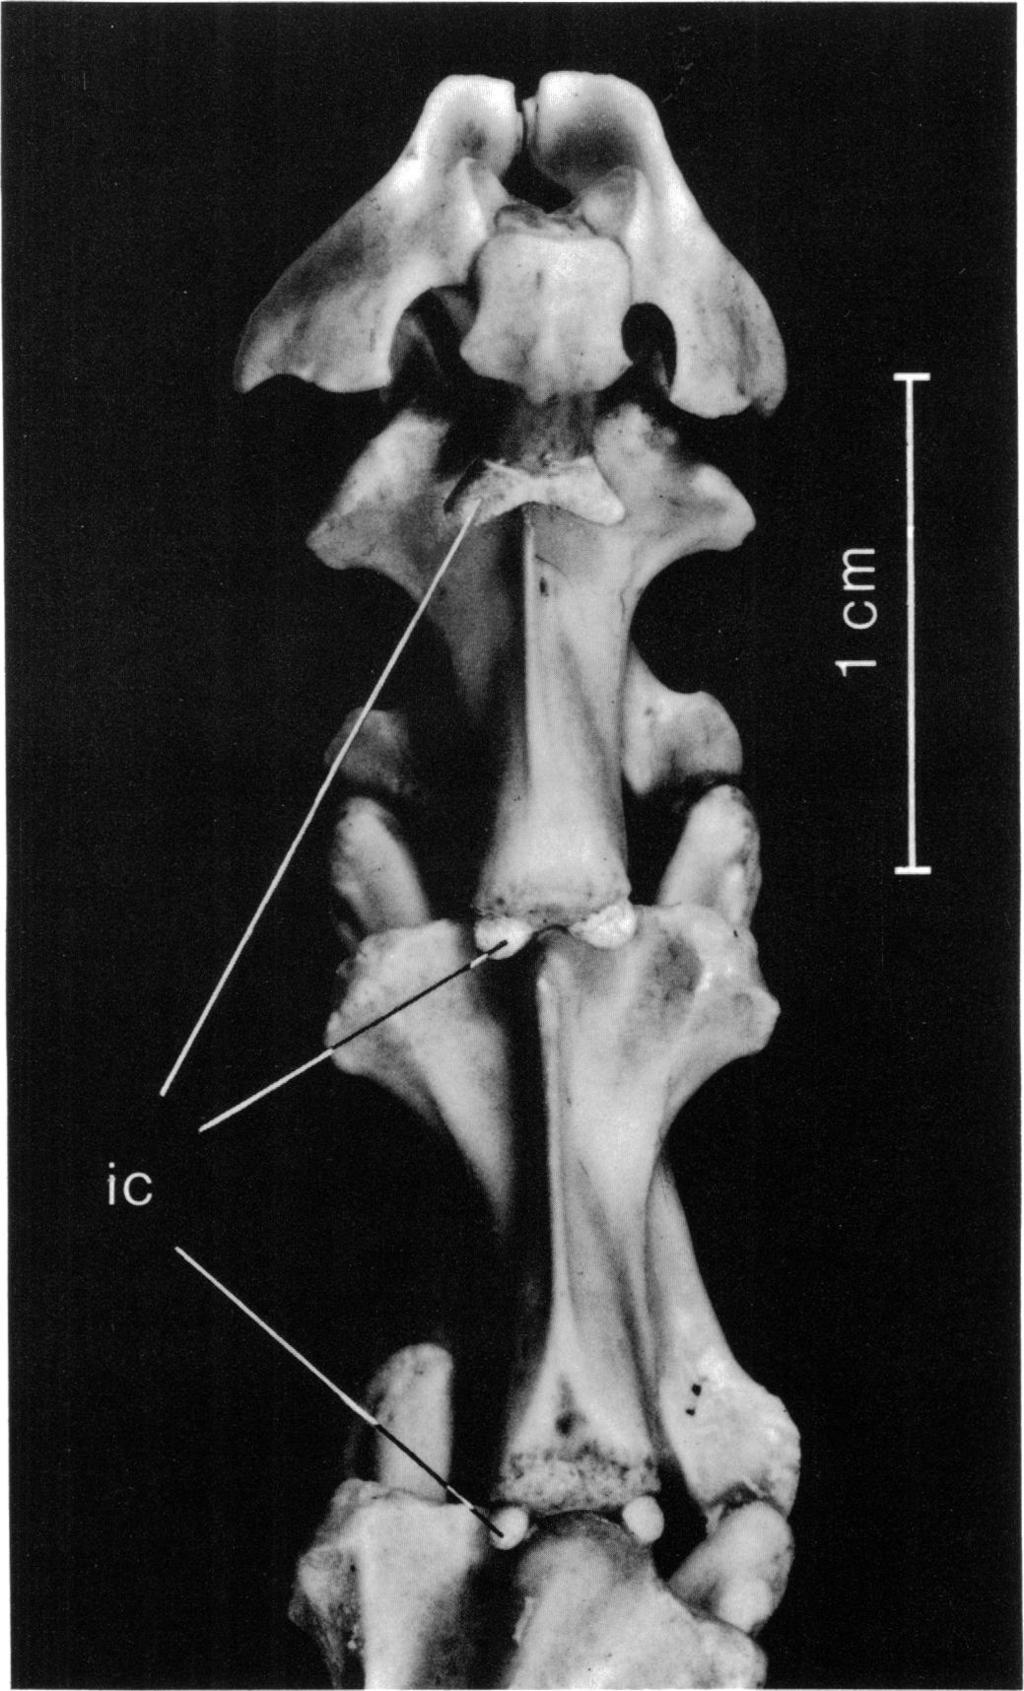 1985 GAFFNEY: MEIOLANIA PLATYCEPS 13 8 FIG. 9. Meiolania platyceps. Ventral view of cervicals one through eight, intercentra shown in stipple. Partially restored, based on AM F:49141.